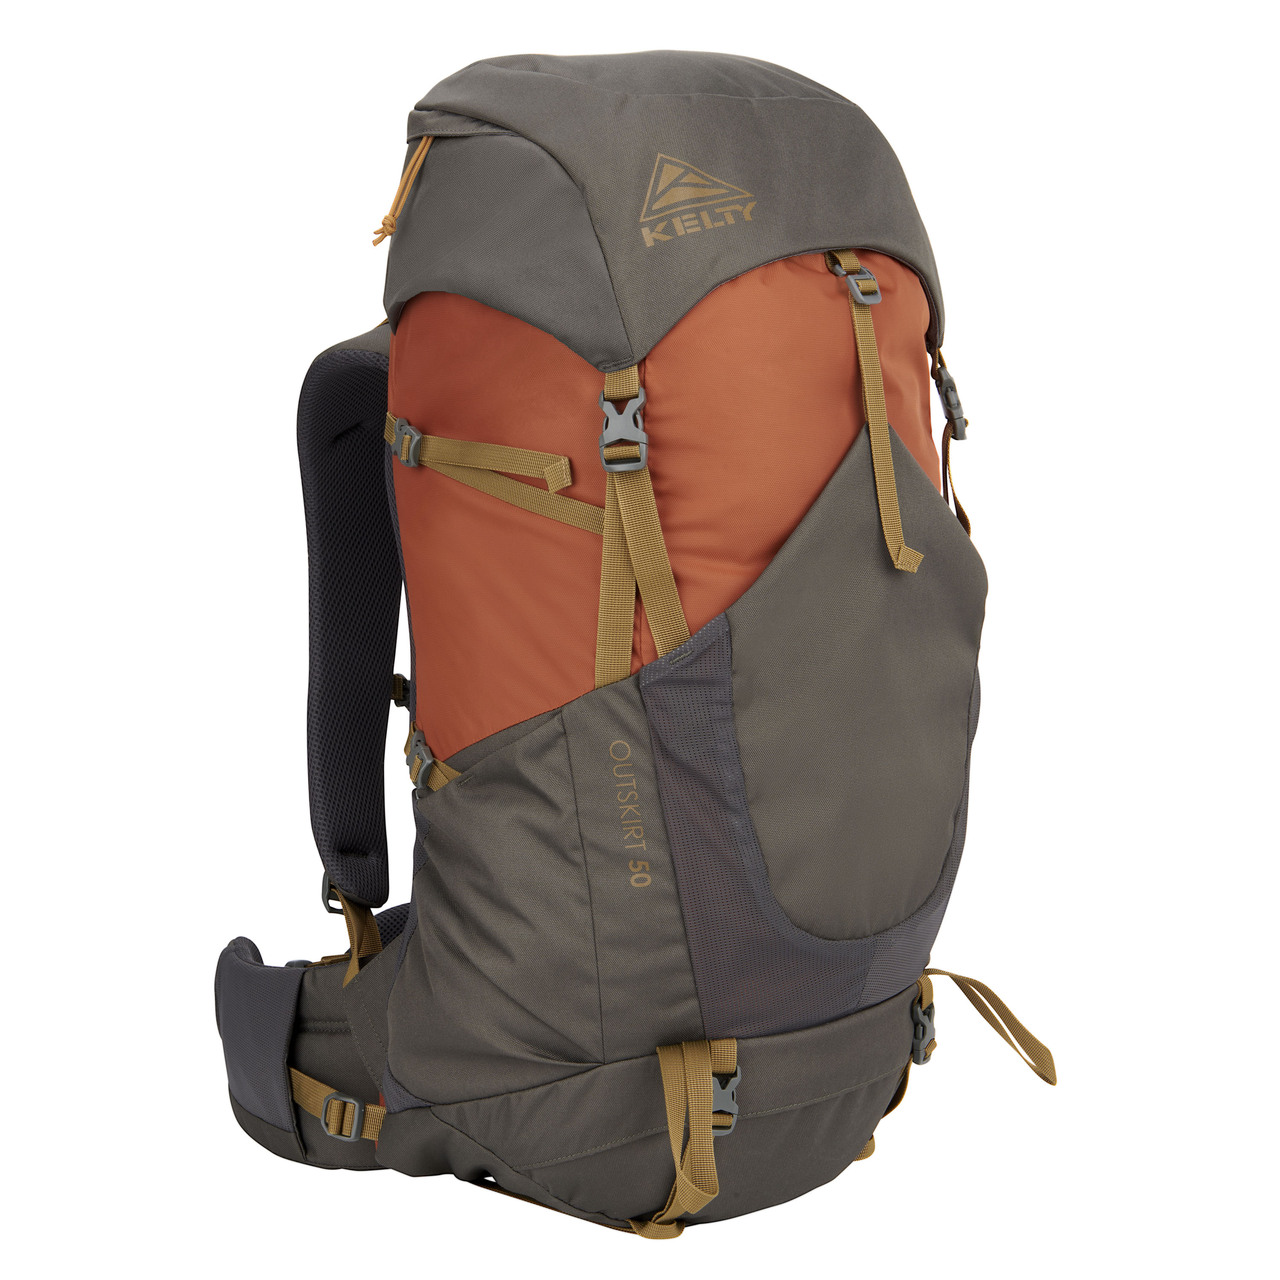 Gingerbread/Beluga - Kelty Outskirt 50 backpack, front view